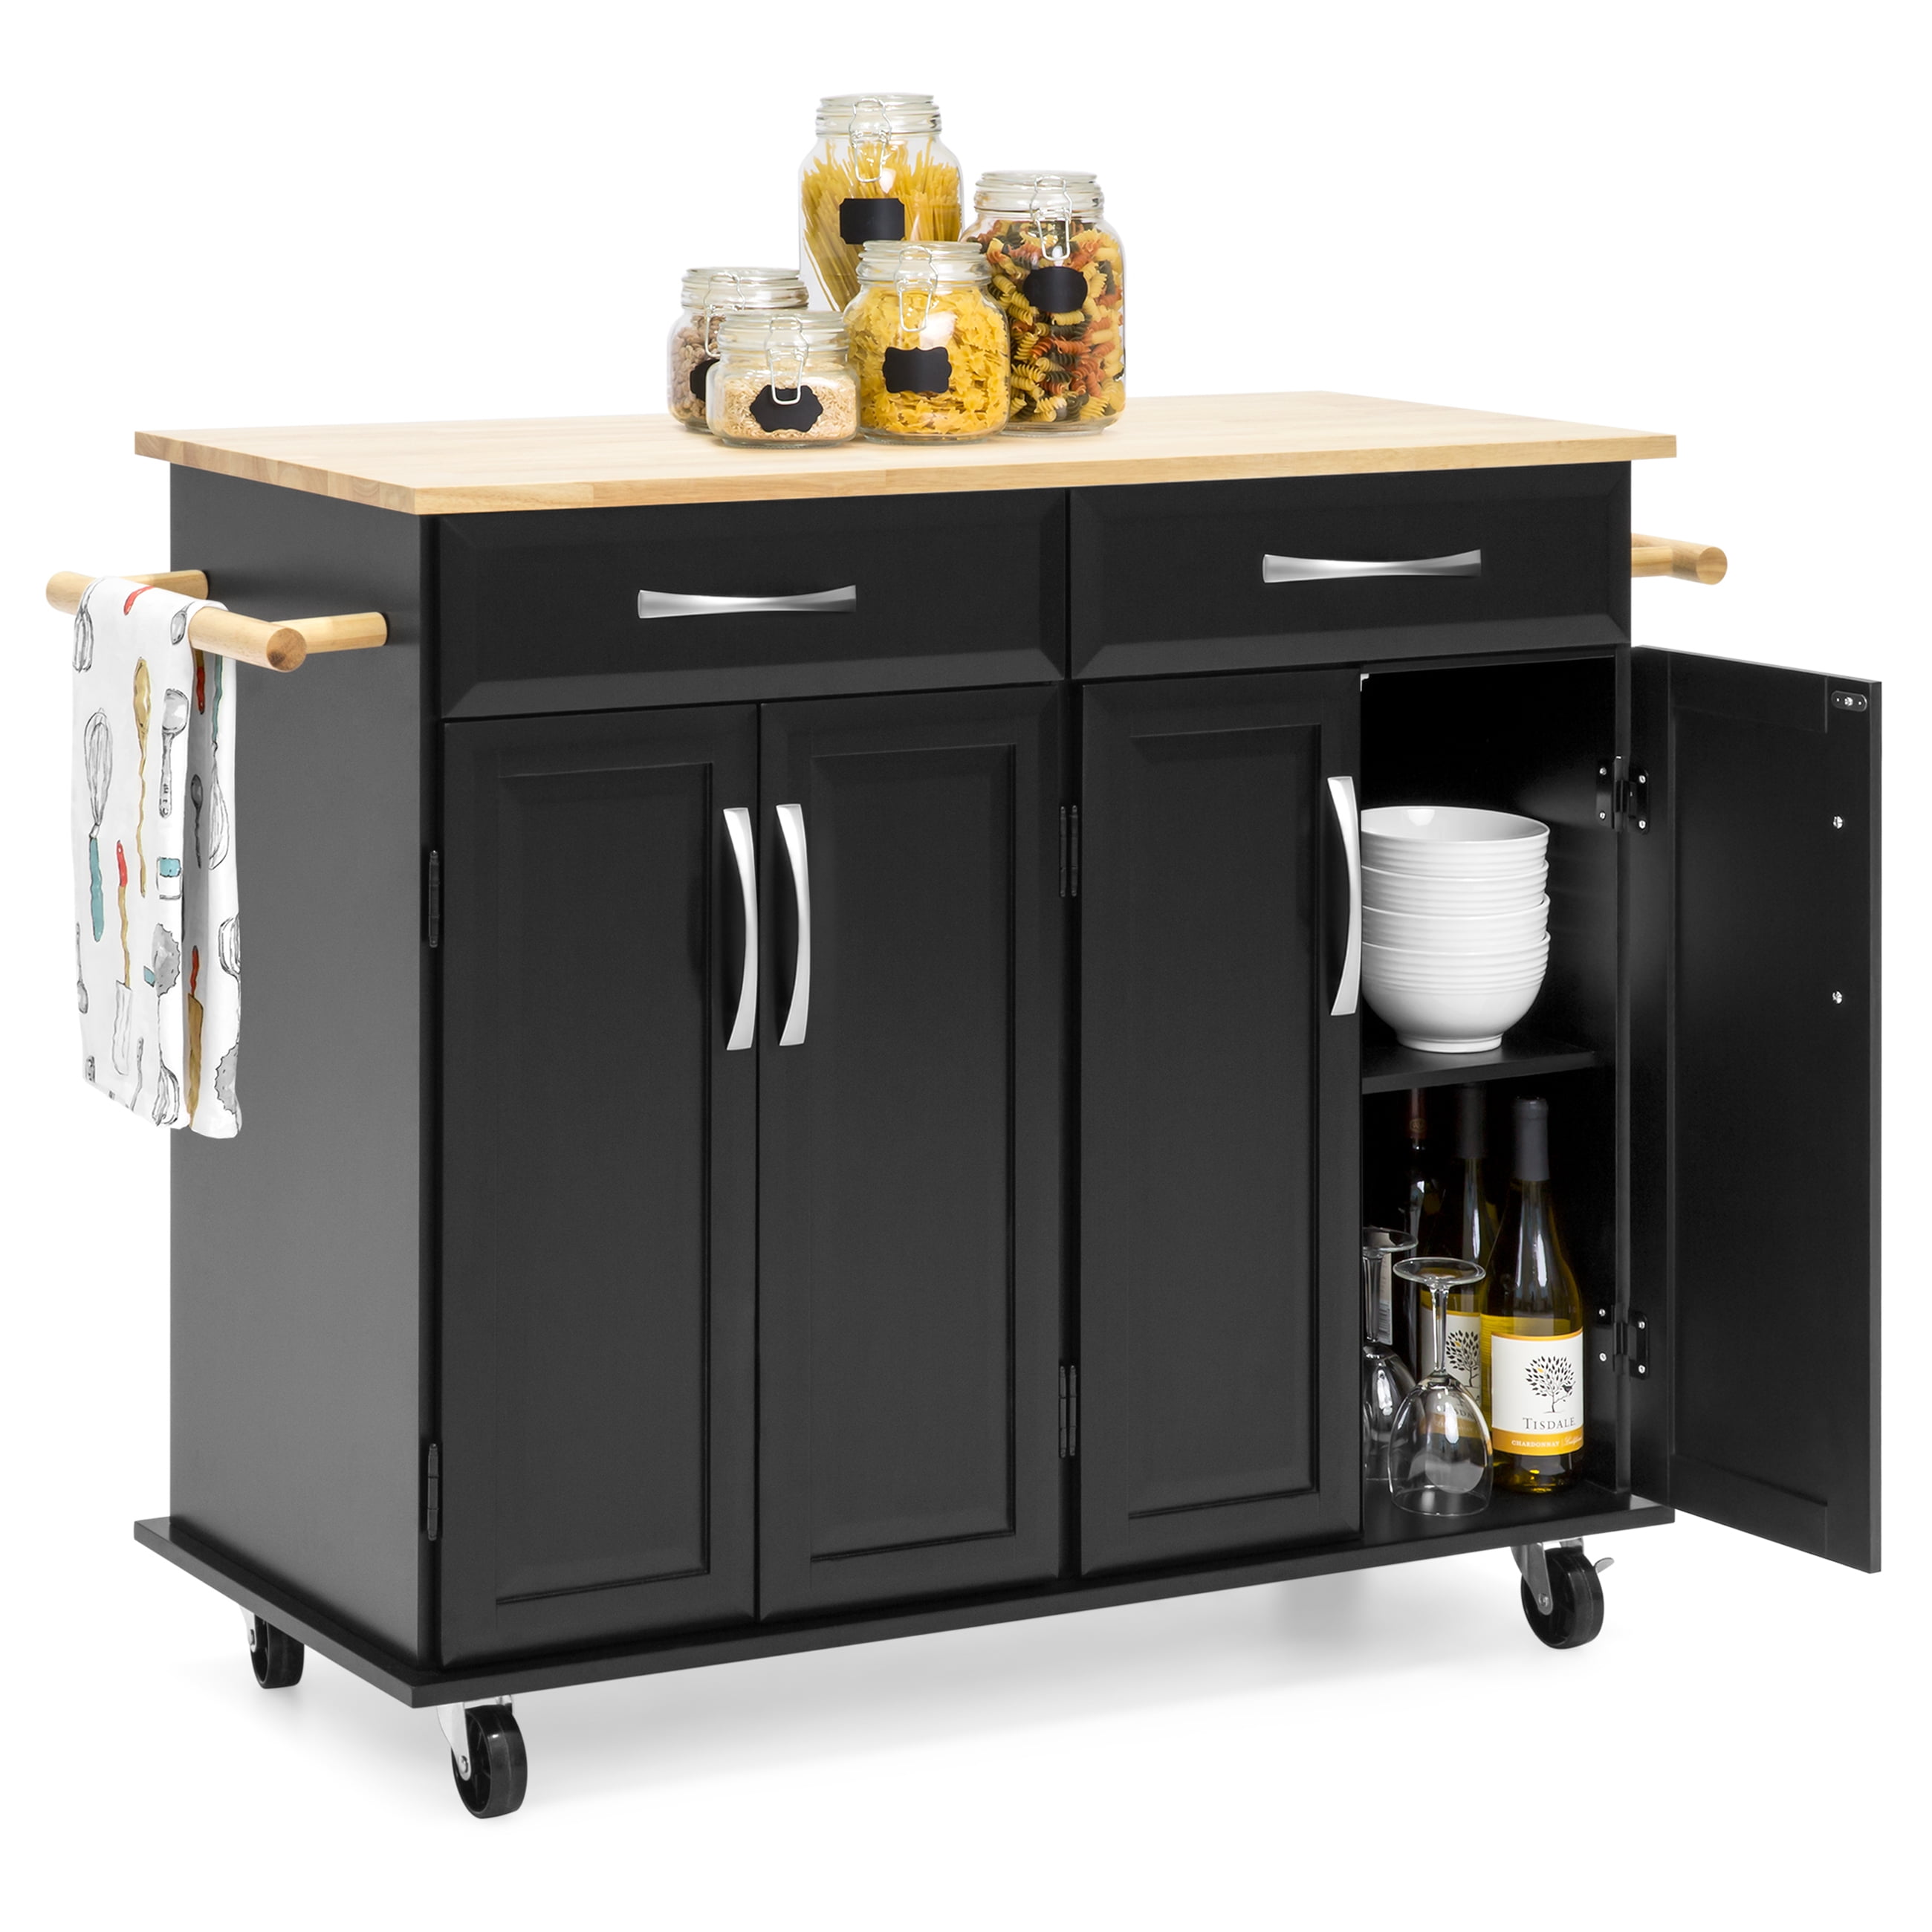 Espresso Target Marketing Systems Monterey Wood Top Kitchen Buffet Cabinet With Three Drawers and Cabinet with Shelf With Towel Bar on Caster Wheels